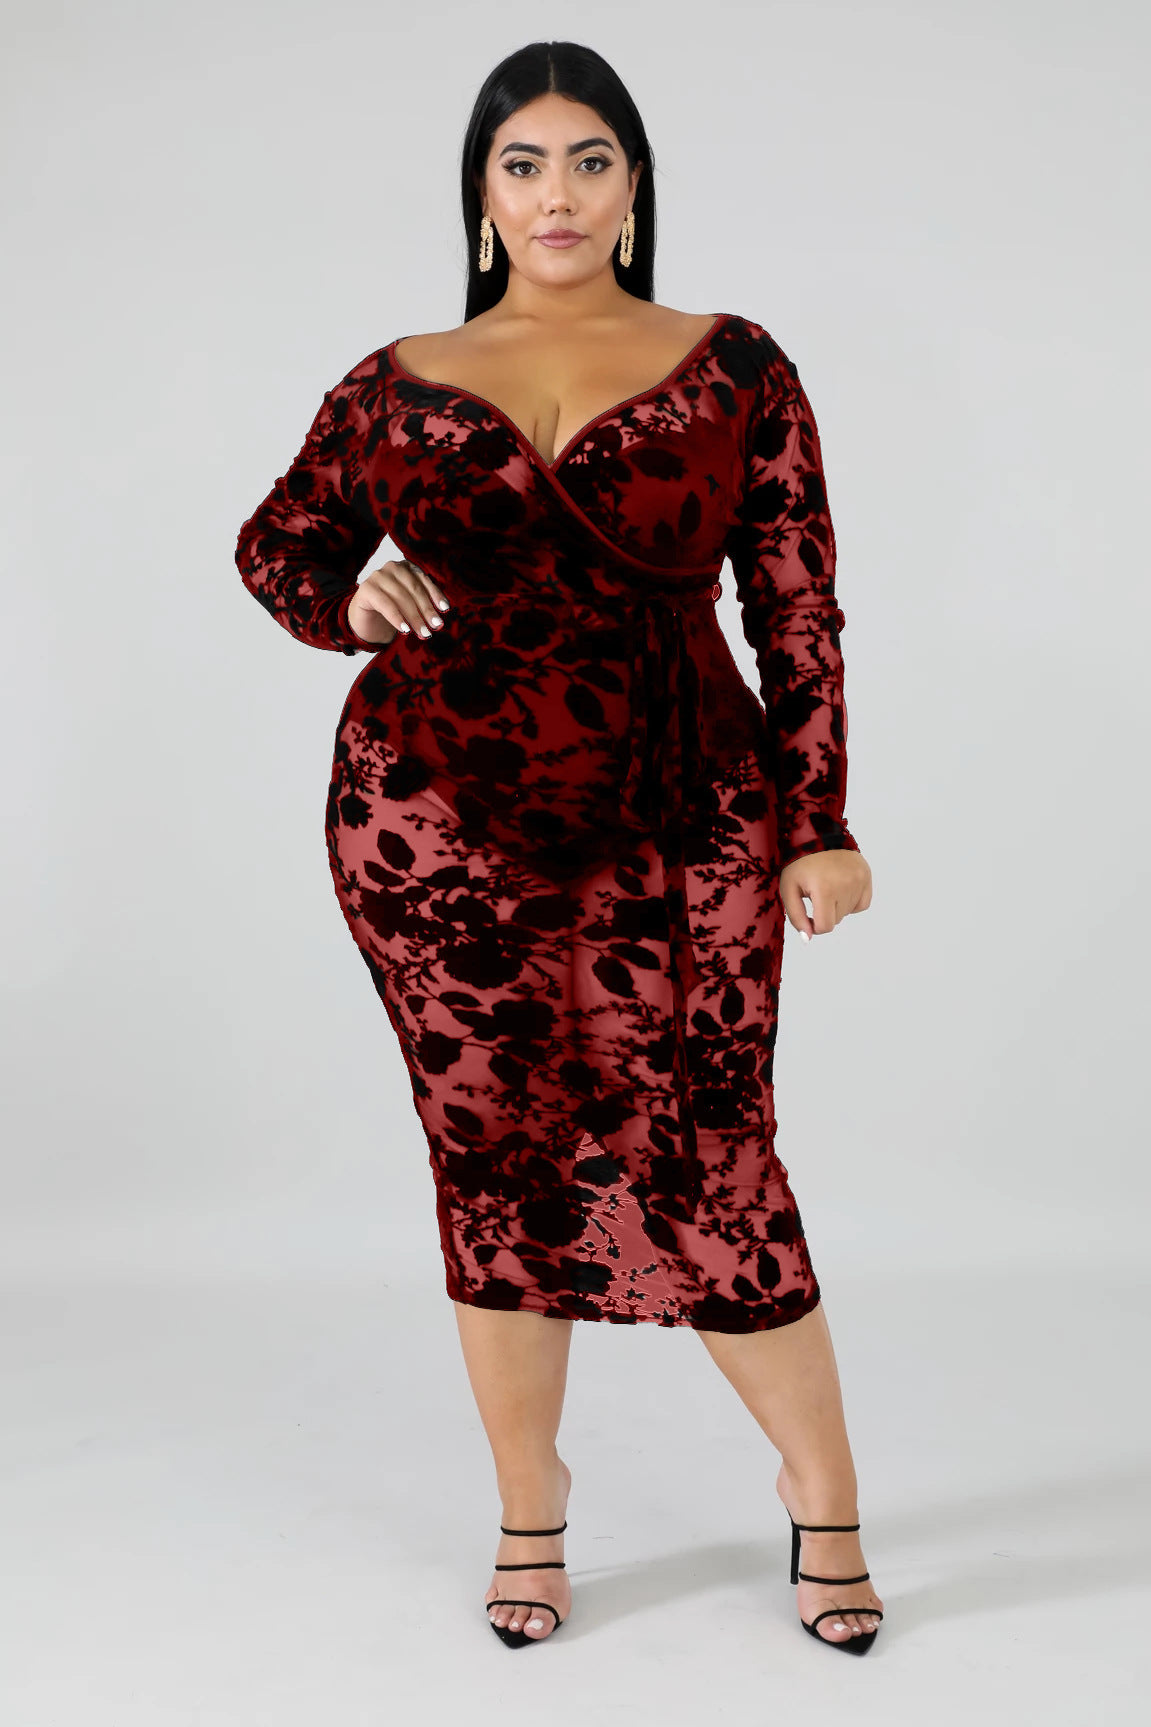 Dress  | Women Plus Size Embroided Lace See through Dress | |  | thecurvestory.myshopify.com